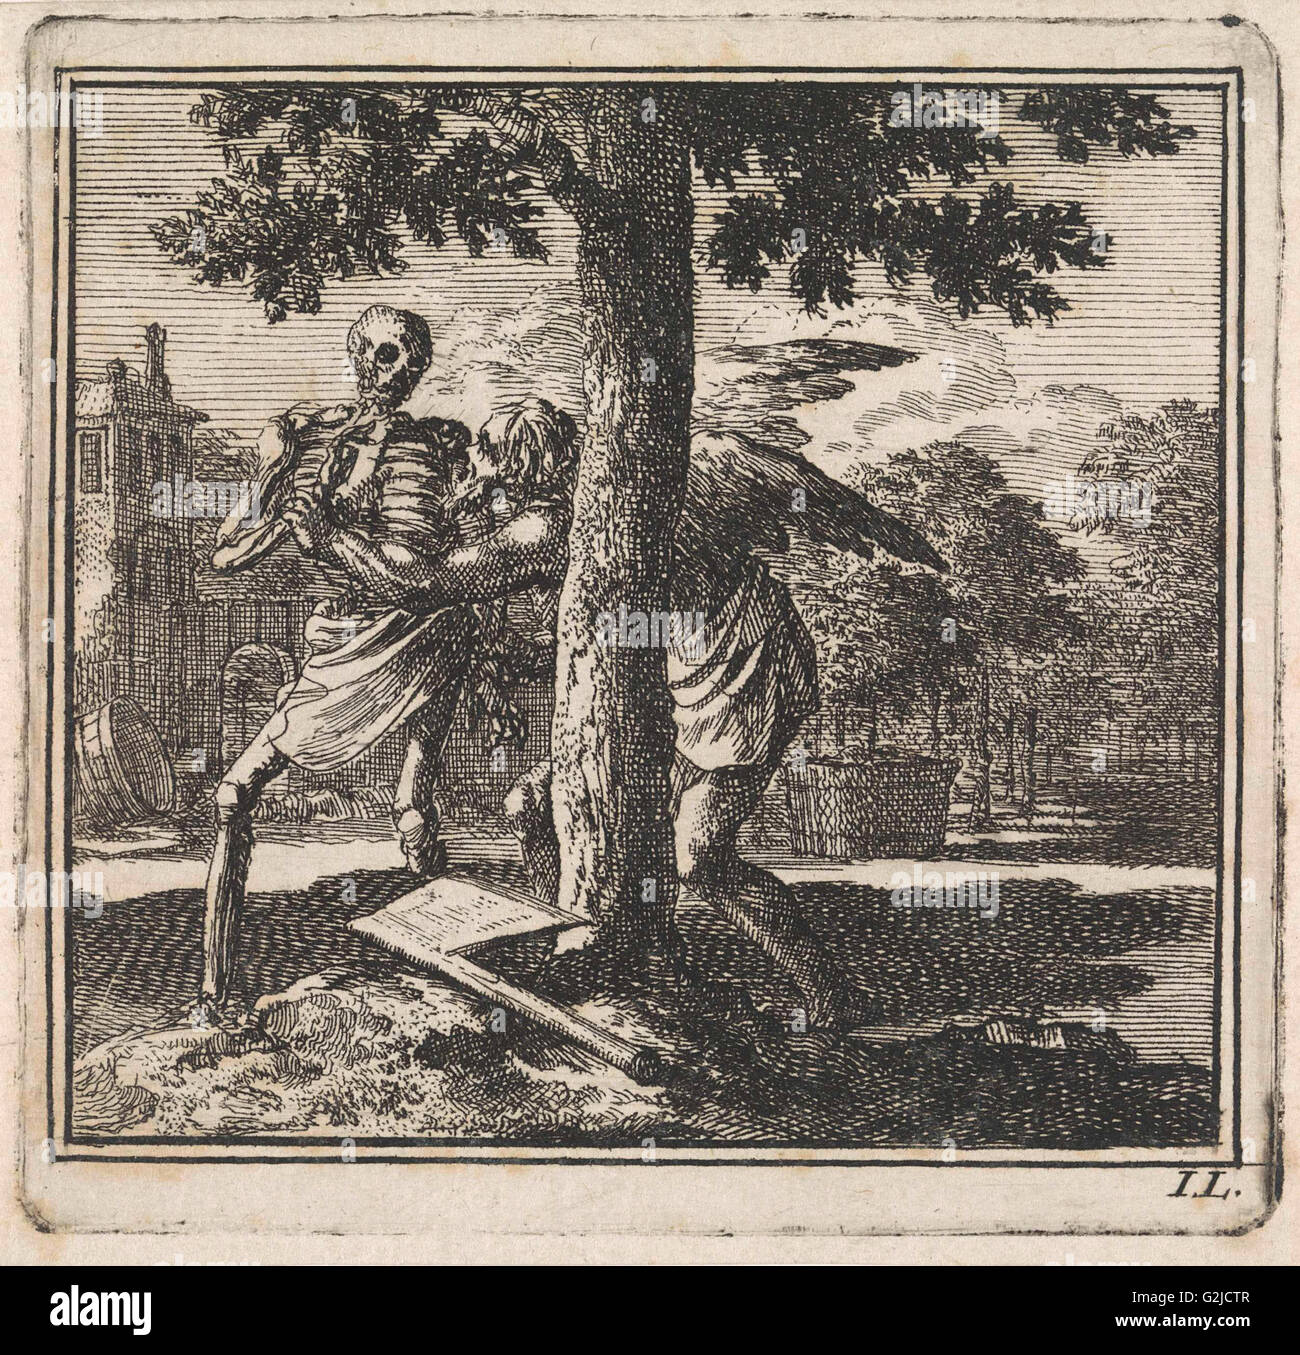 Father Time keeps death from chopping down a tree, Jan Luyken, wed. Pieter Arentsz & Cornelis van der Sys (II), 1710 Stock Photo